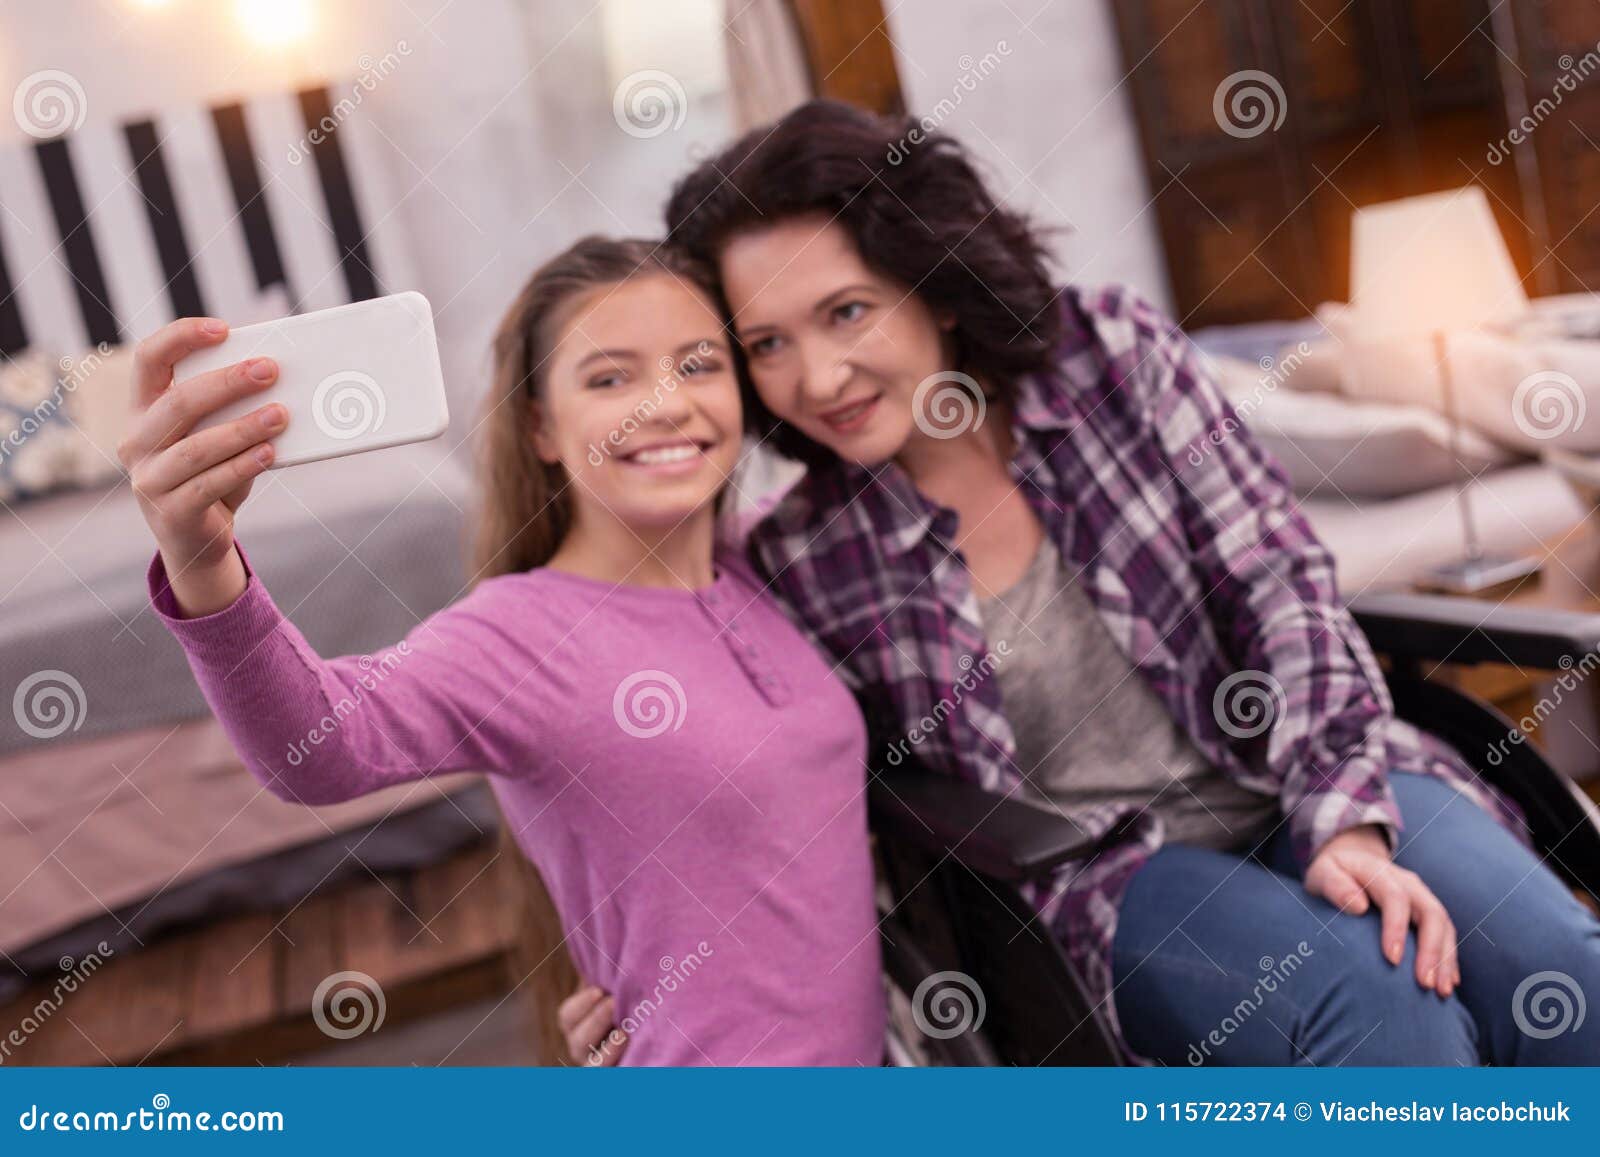 Cheerful Crippled Woman and Girl Photographing Stock Photo - Image of ...